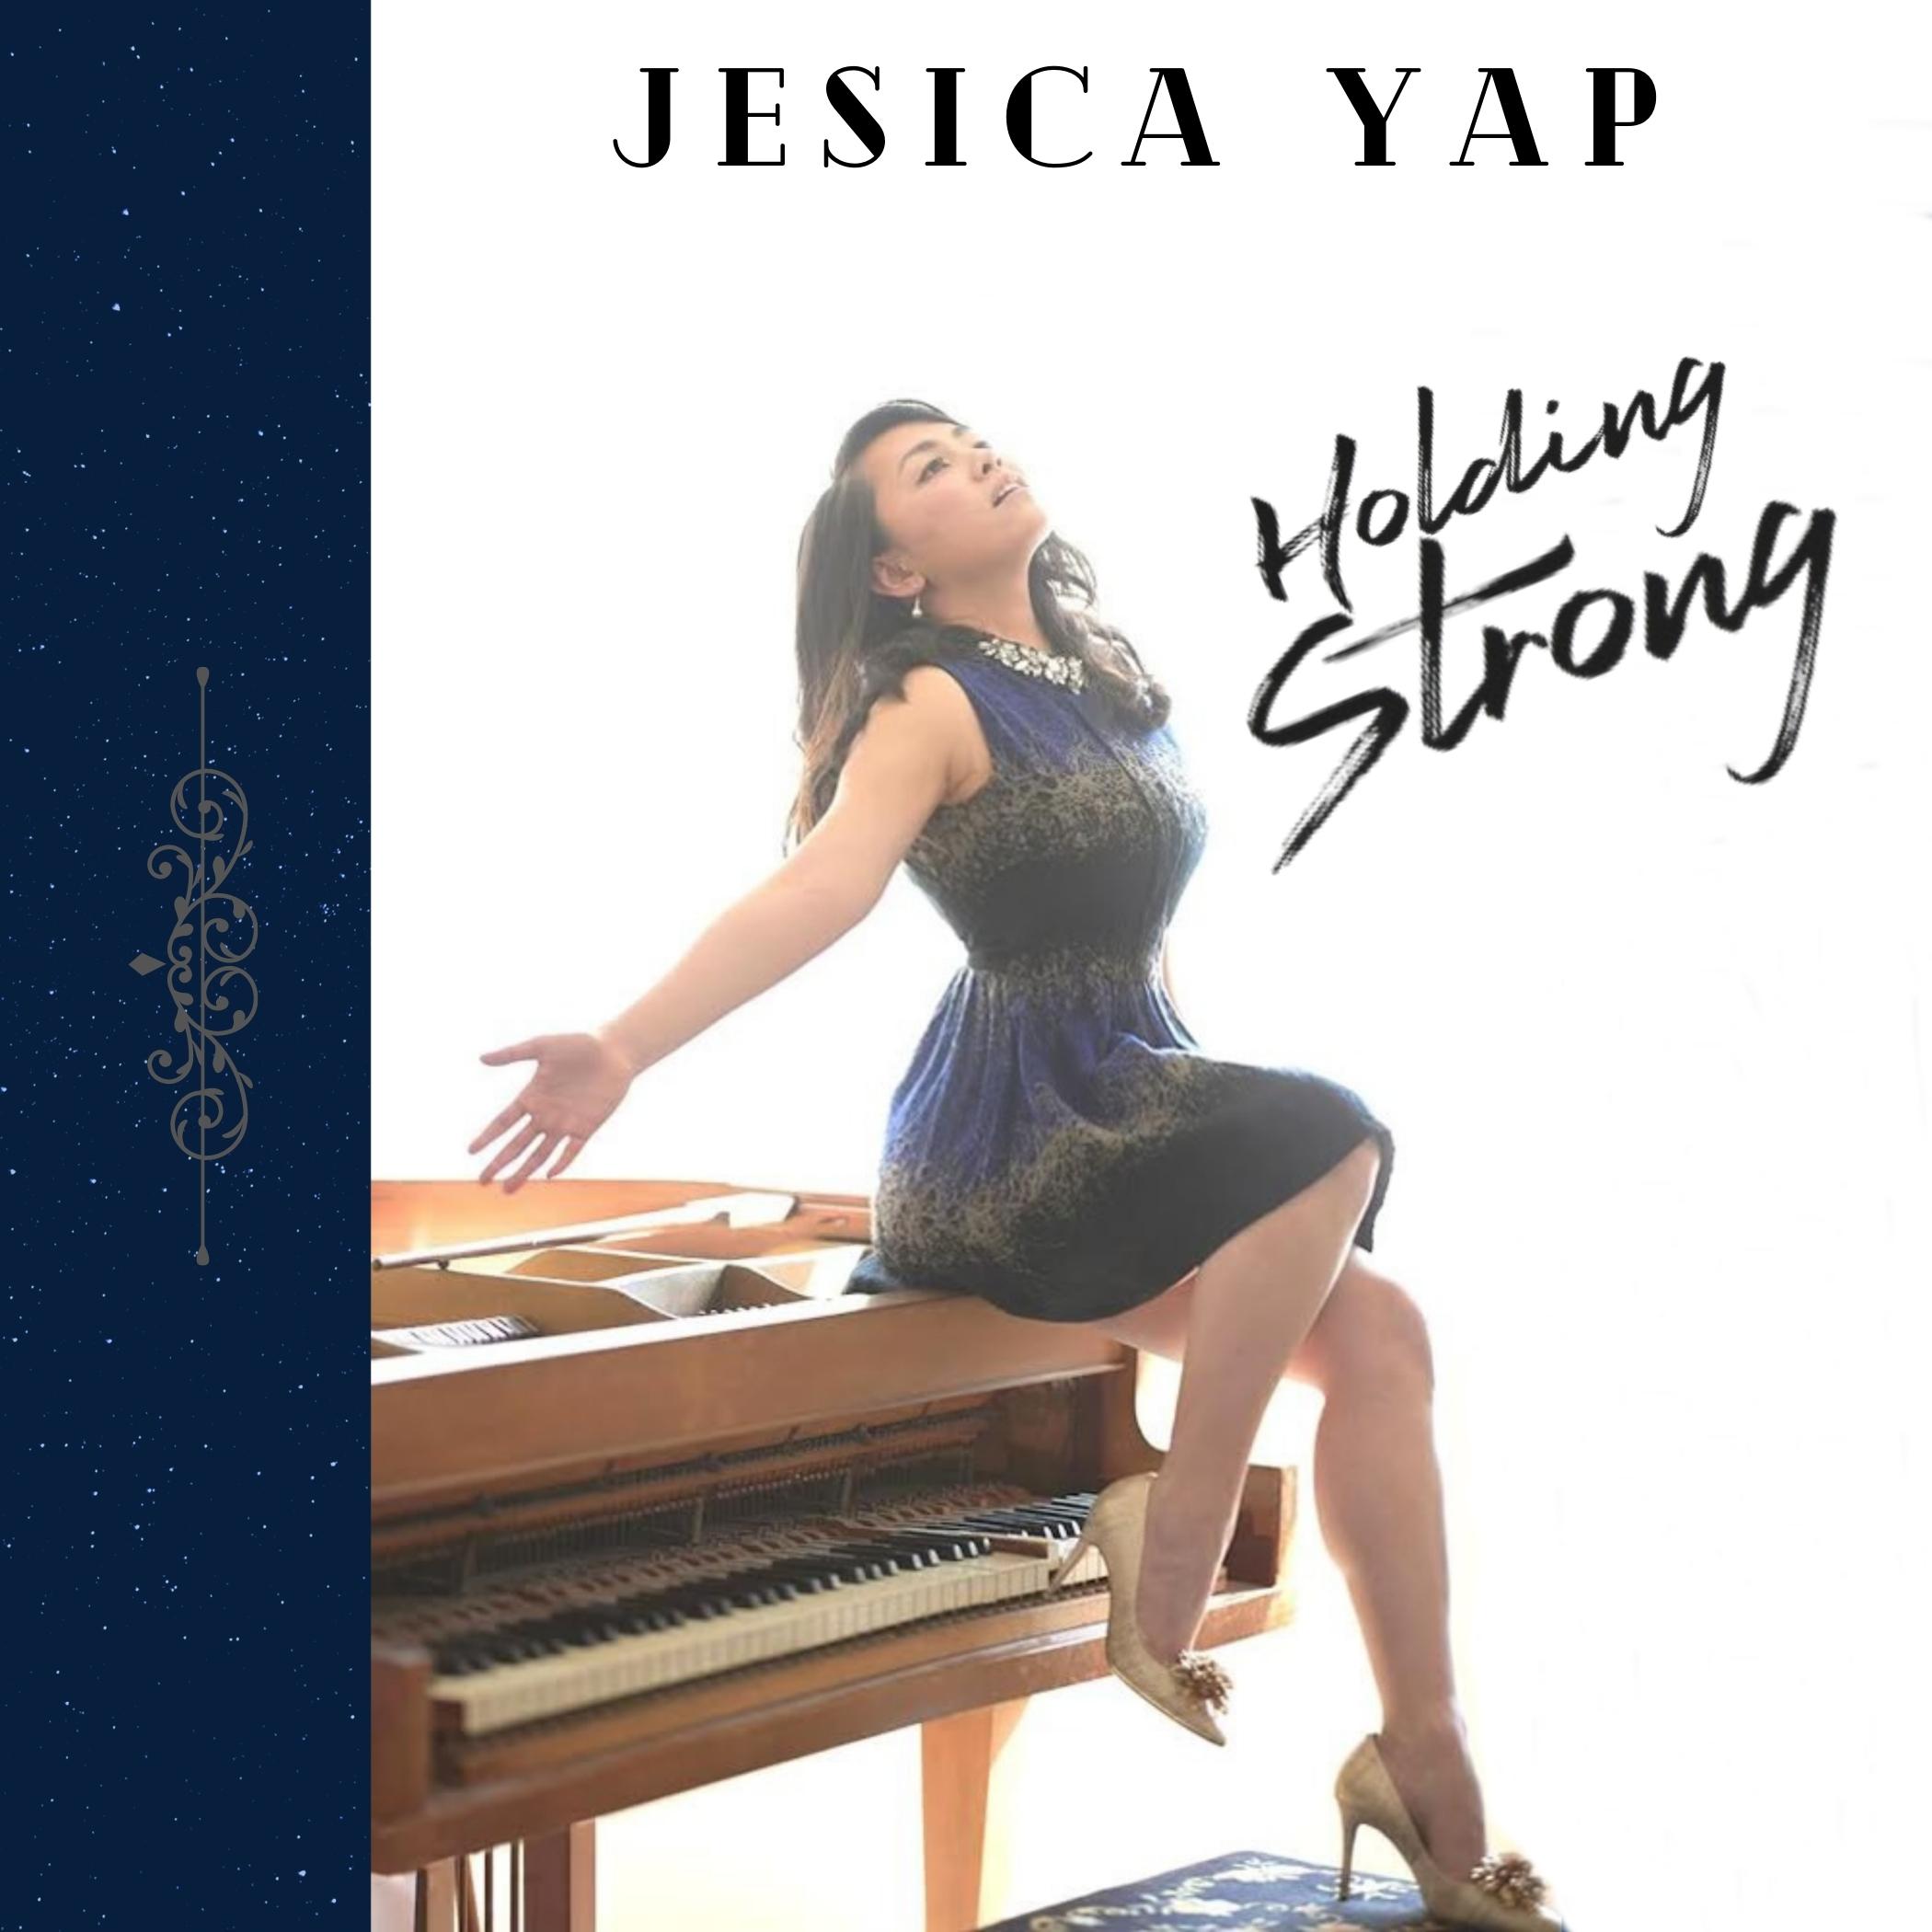 ‘Hold Strong’ says the incredible ‘Jesica Yap’ as she releases new song “Holding Strong,”